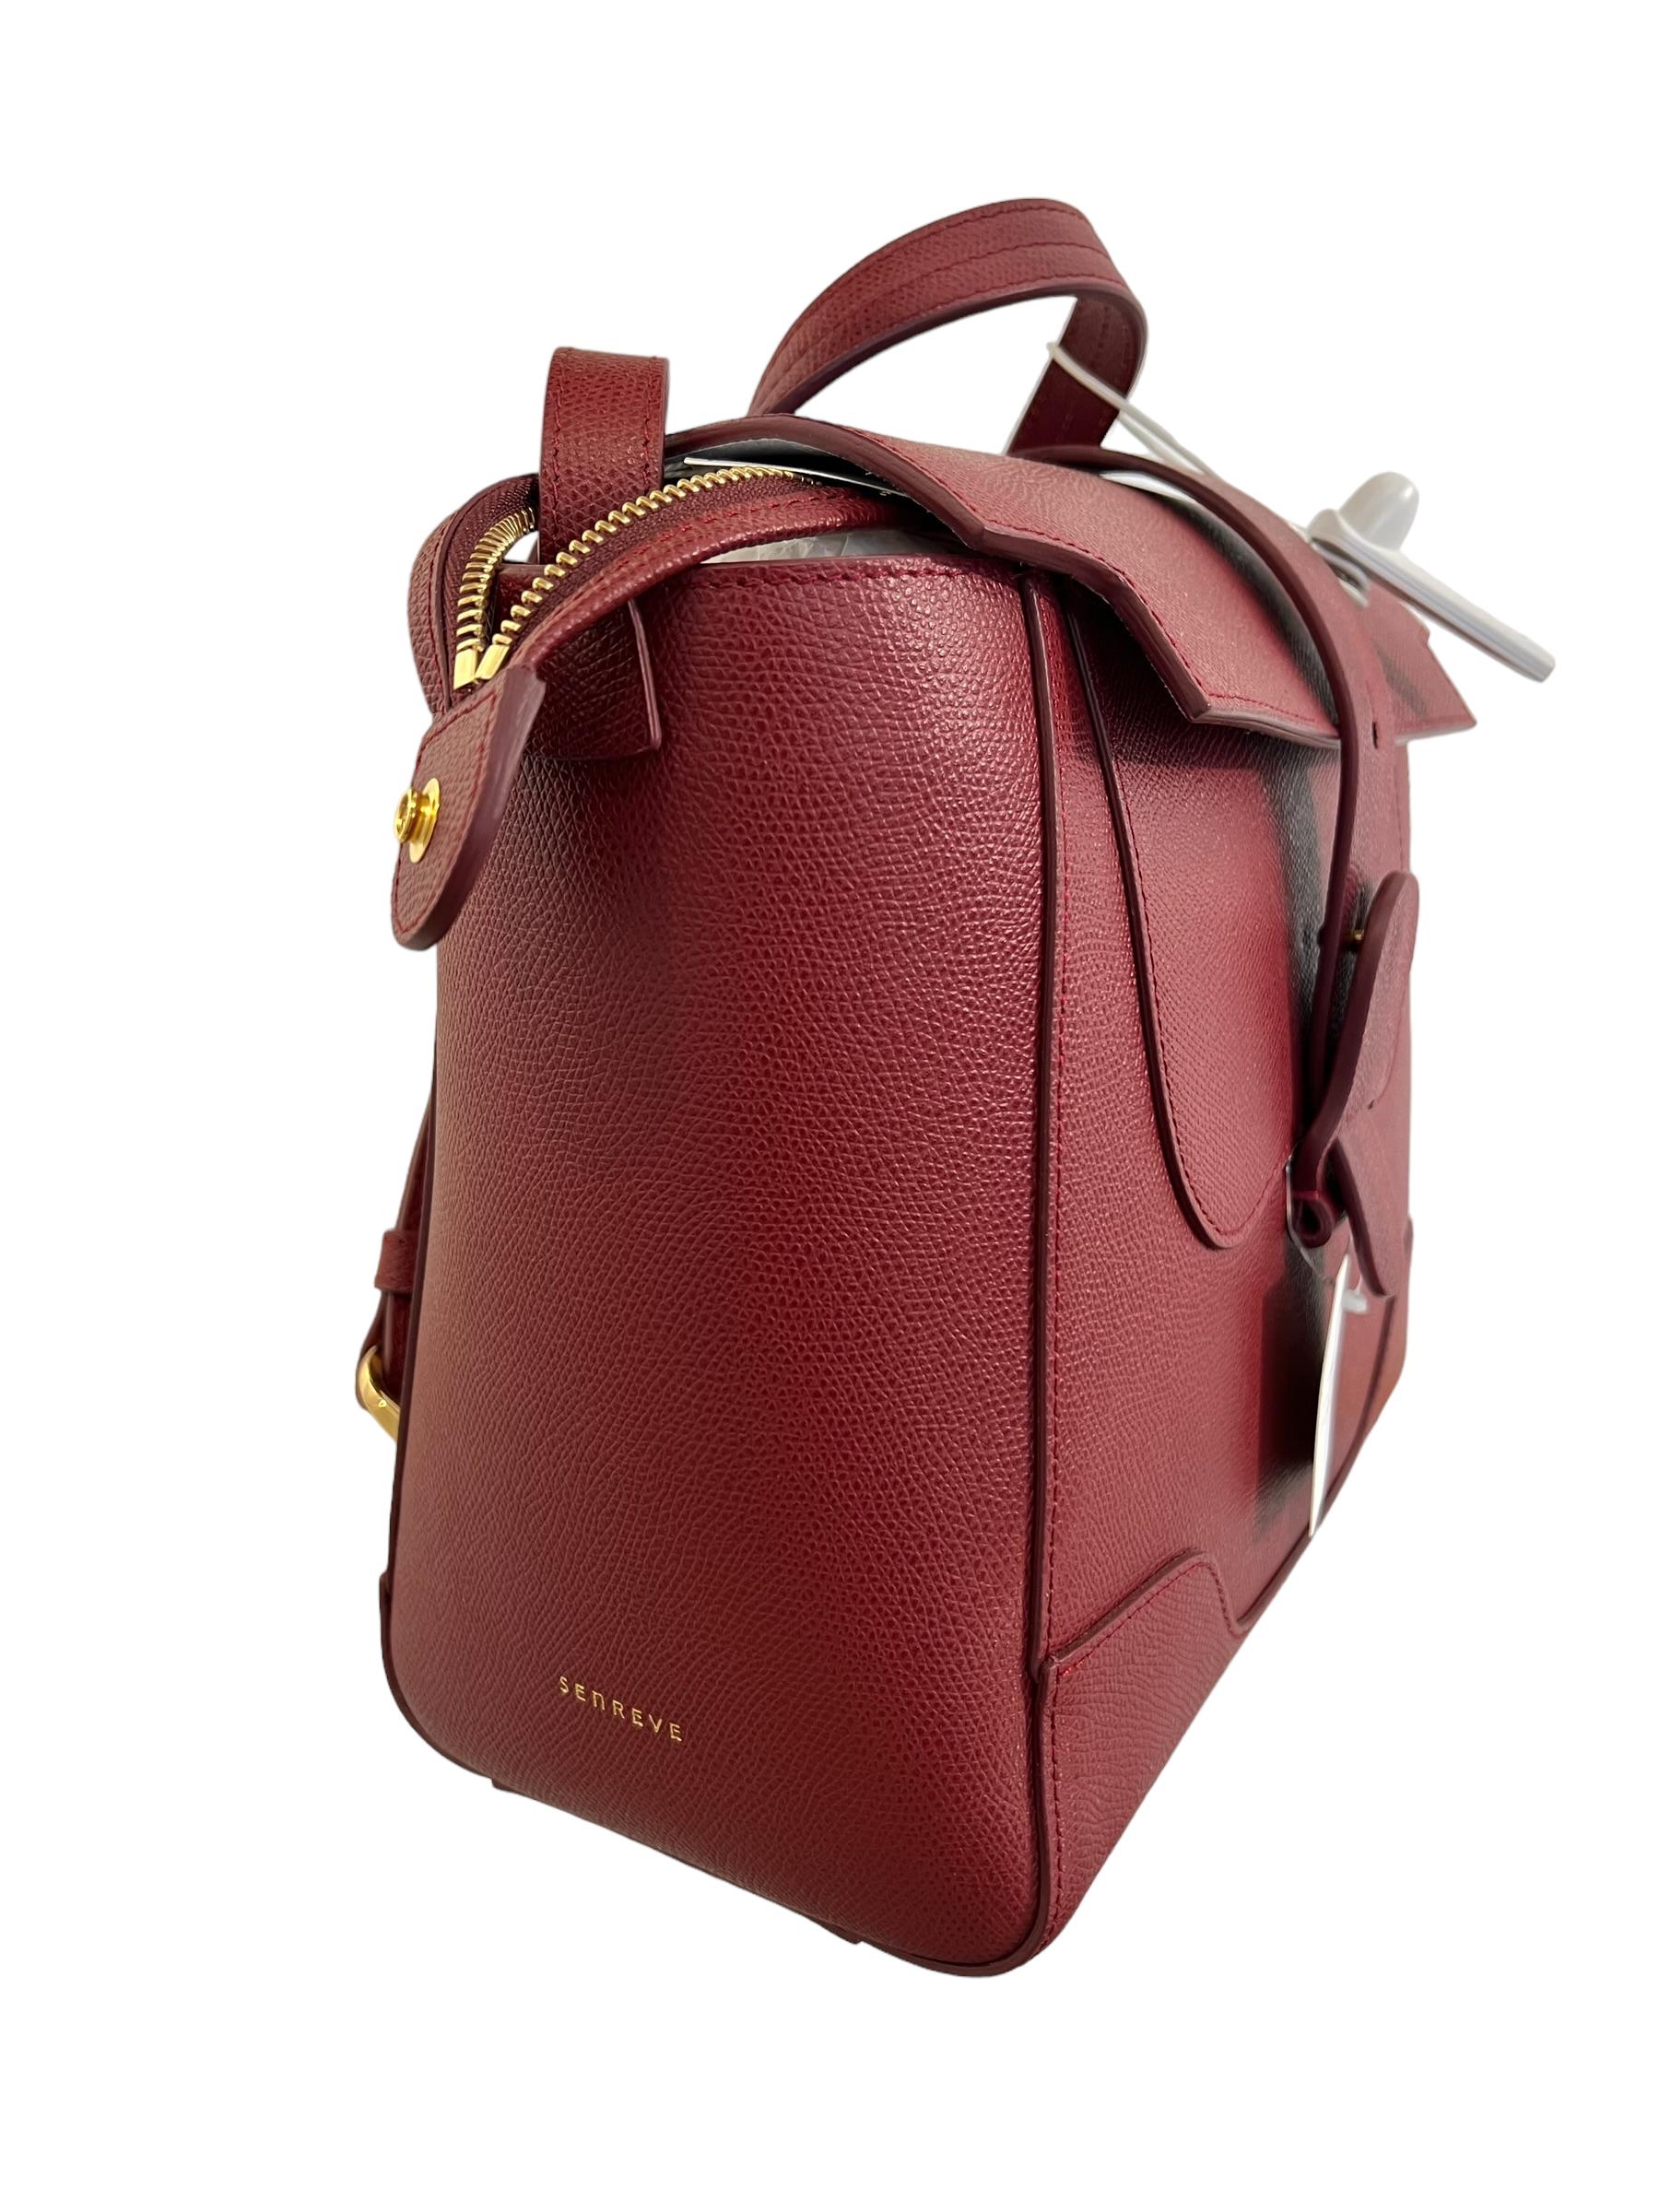 Designed For The Multi-Faceted Modern Woman, Senreve Burgundy Satchel Leather Backpack. Where beauty meets versatility.